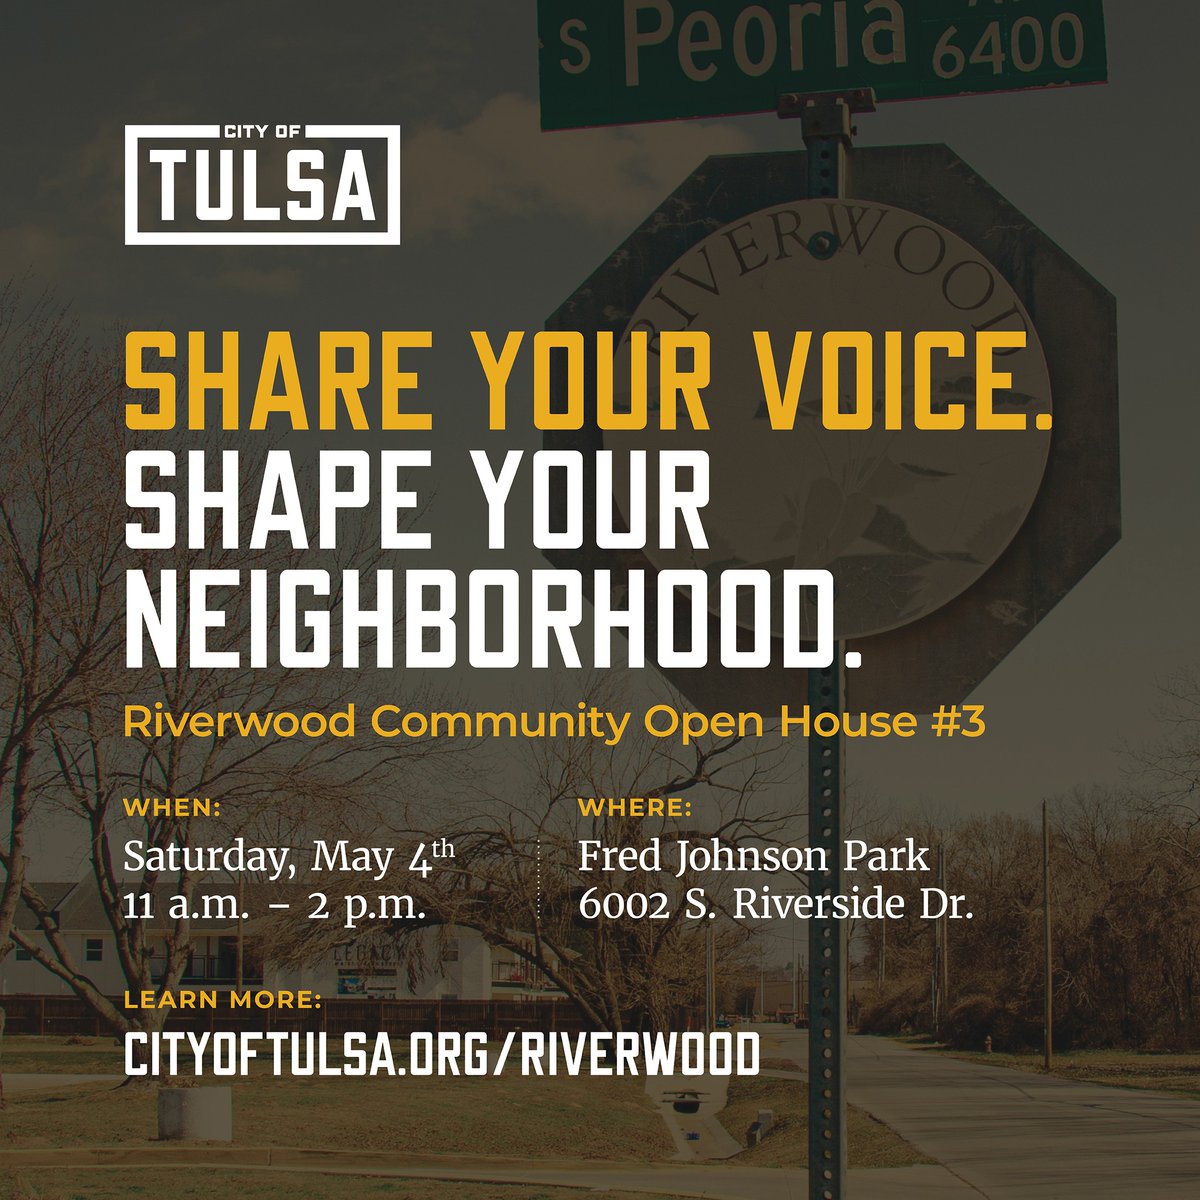 Share your voice and shape your neighborhood at the third Riverwood Community Open House, this Saturday, May 18 from 11 a.m. - 2 p.m. The meeting will be held at Fred Johnson Park, 6002 S. Riverside Dr. #Tulsa #Neighborhoods